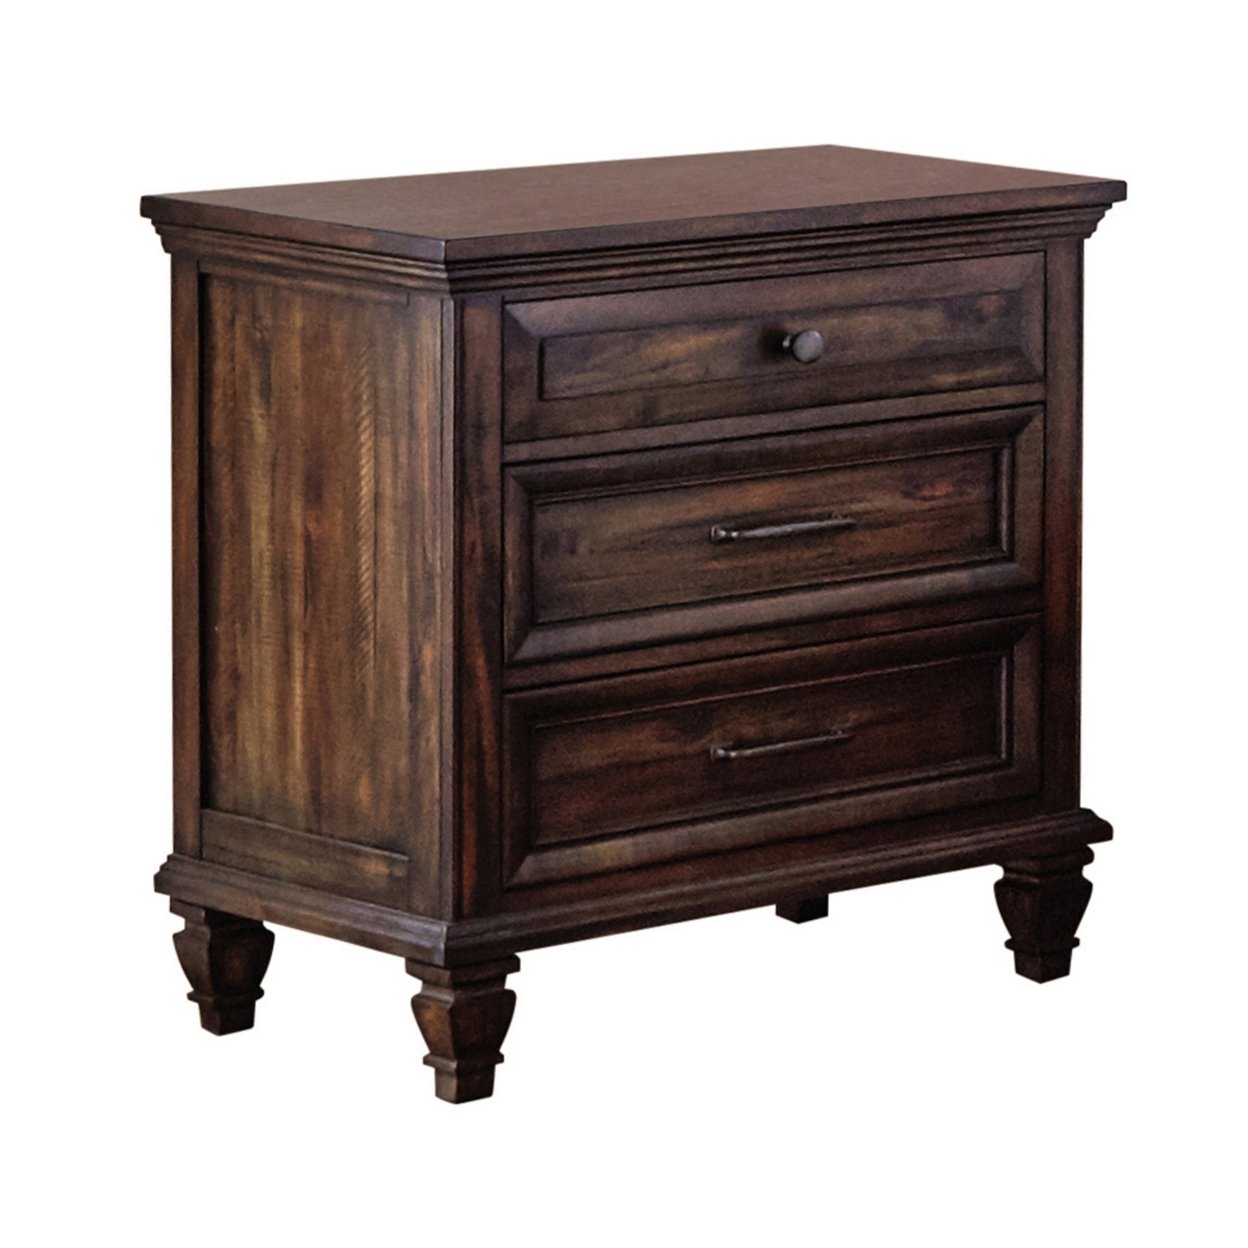 Oxy 30 Inch European Classic Nightstand, 3 Drawers, USB Ports, Wood, Brown